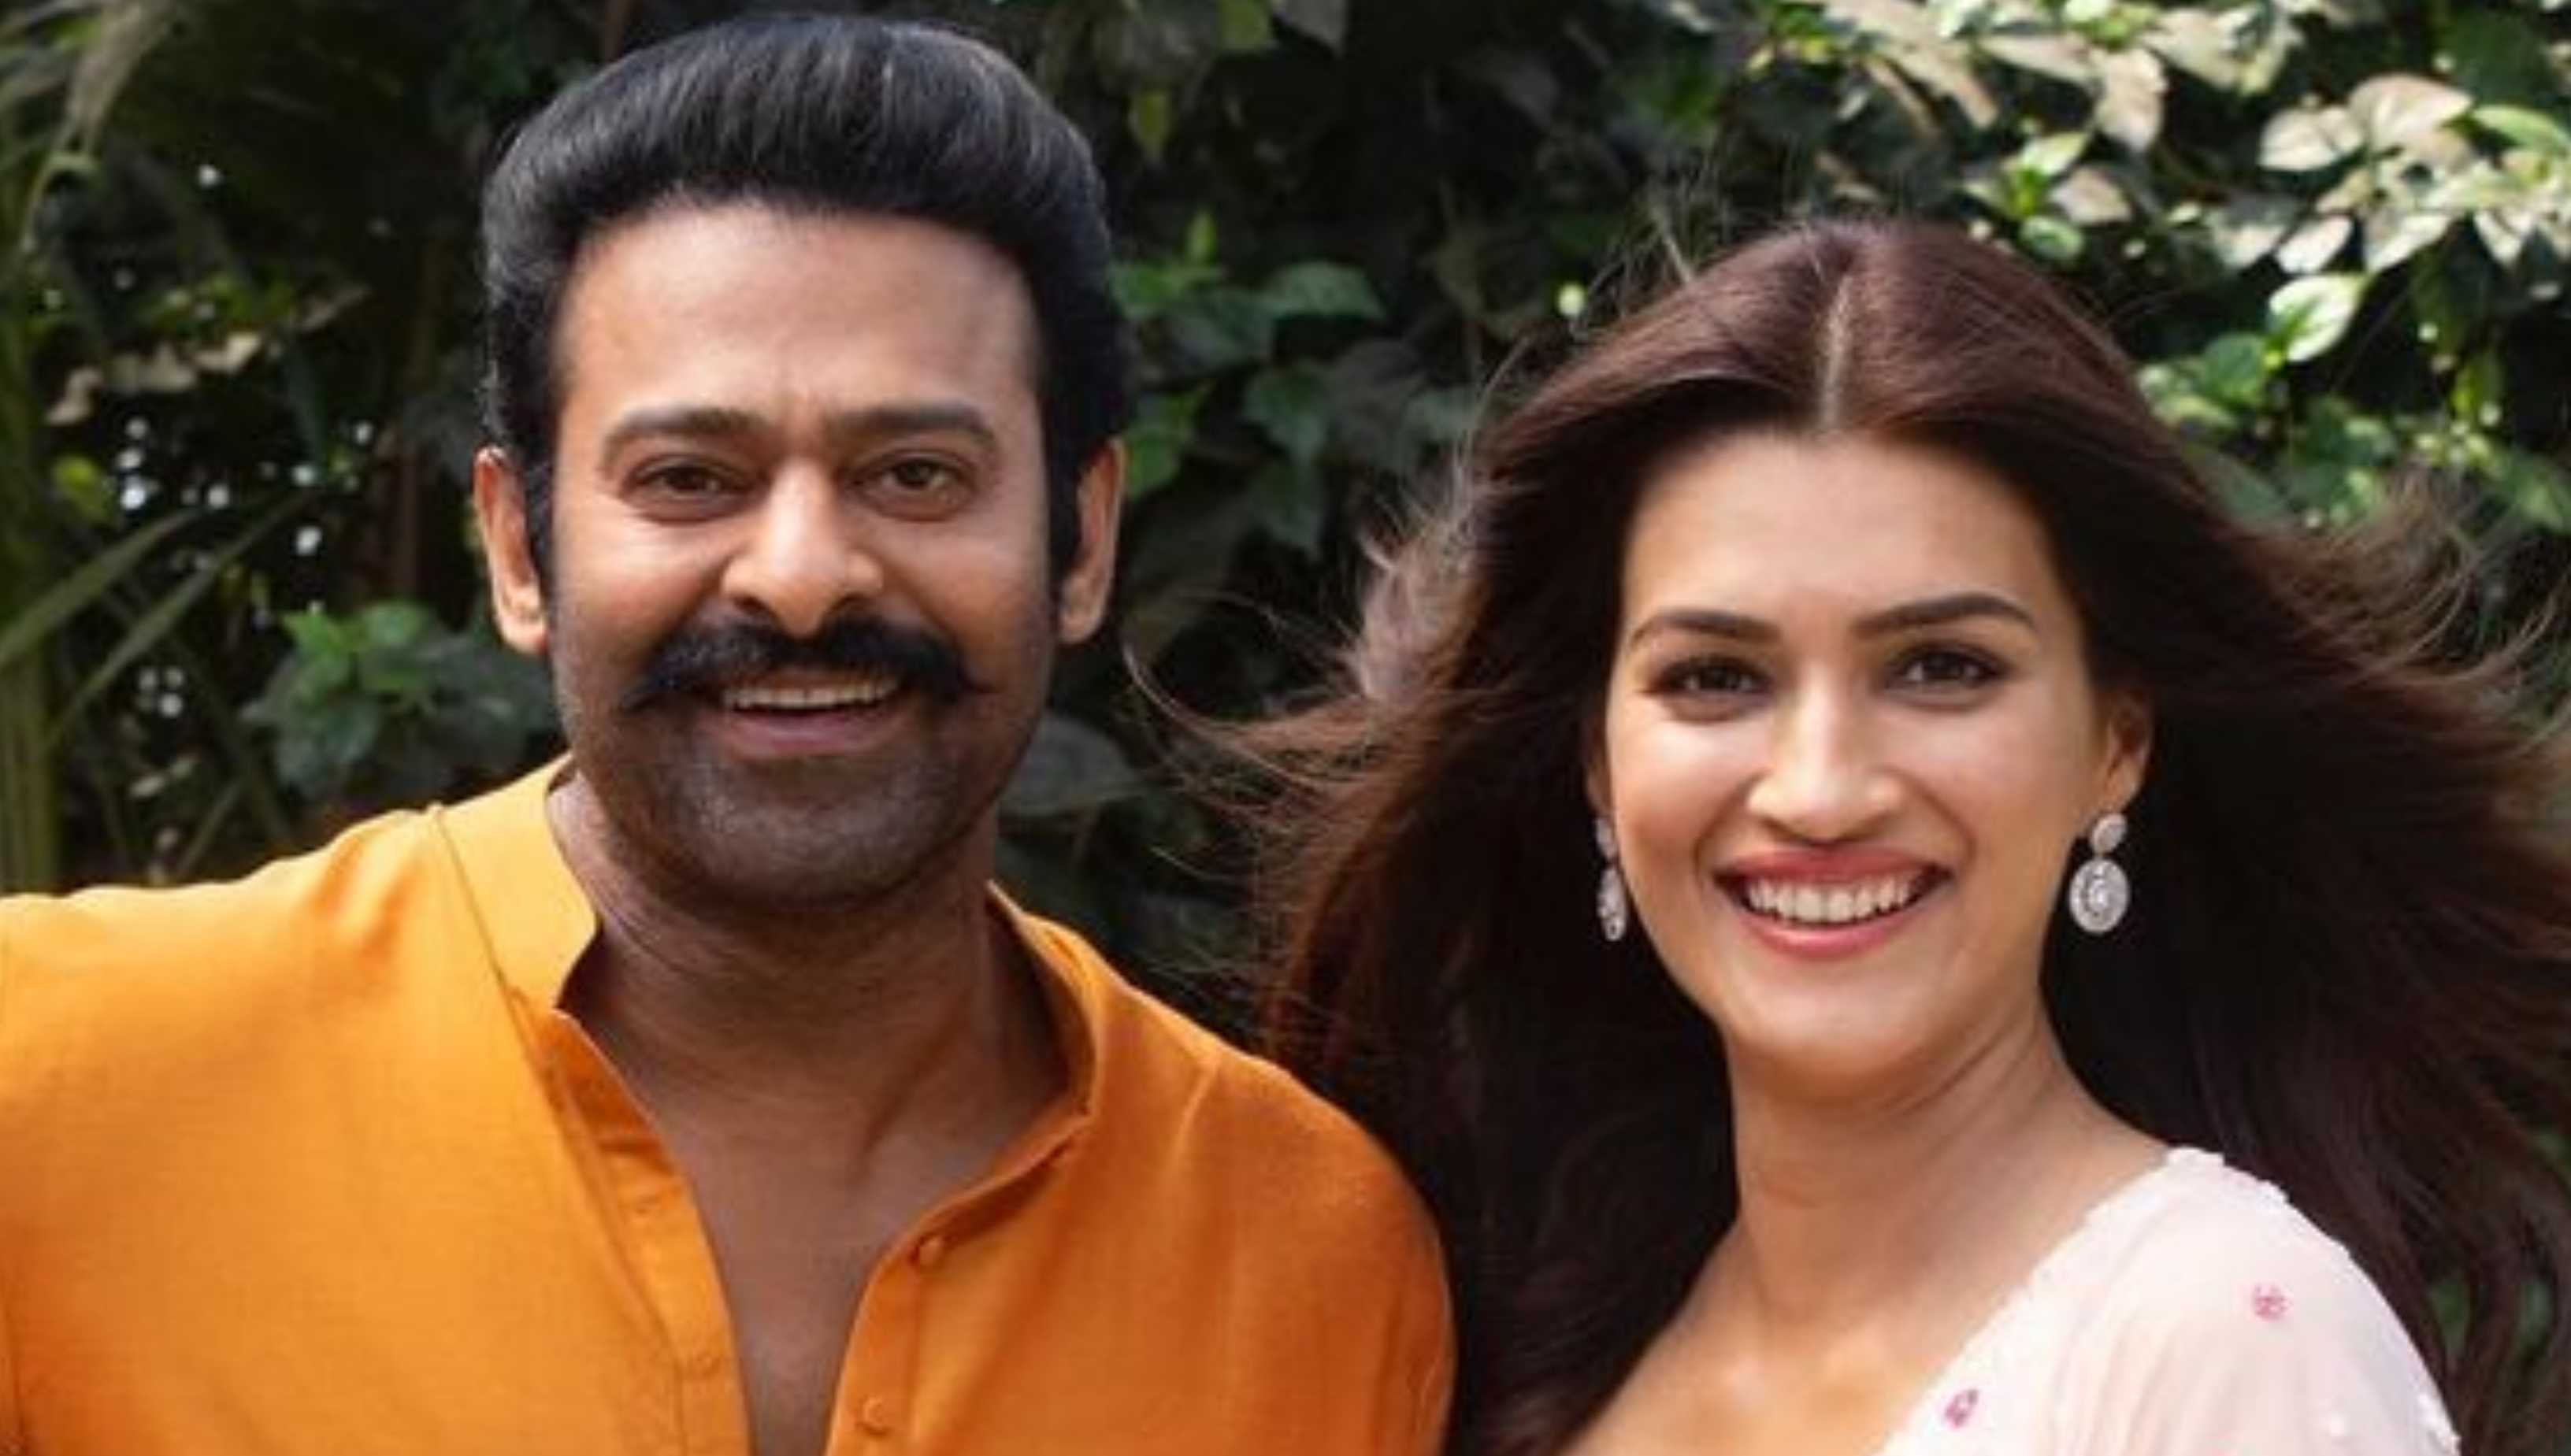 You might not hear Adipurush co-stars Prabhas and Kriti Sanon confirming their relationship anytime soon; here's why